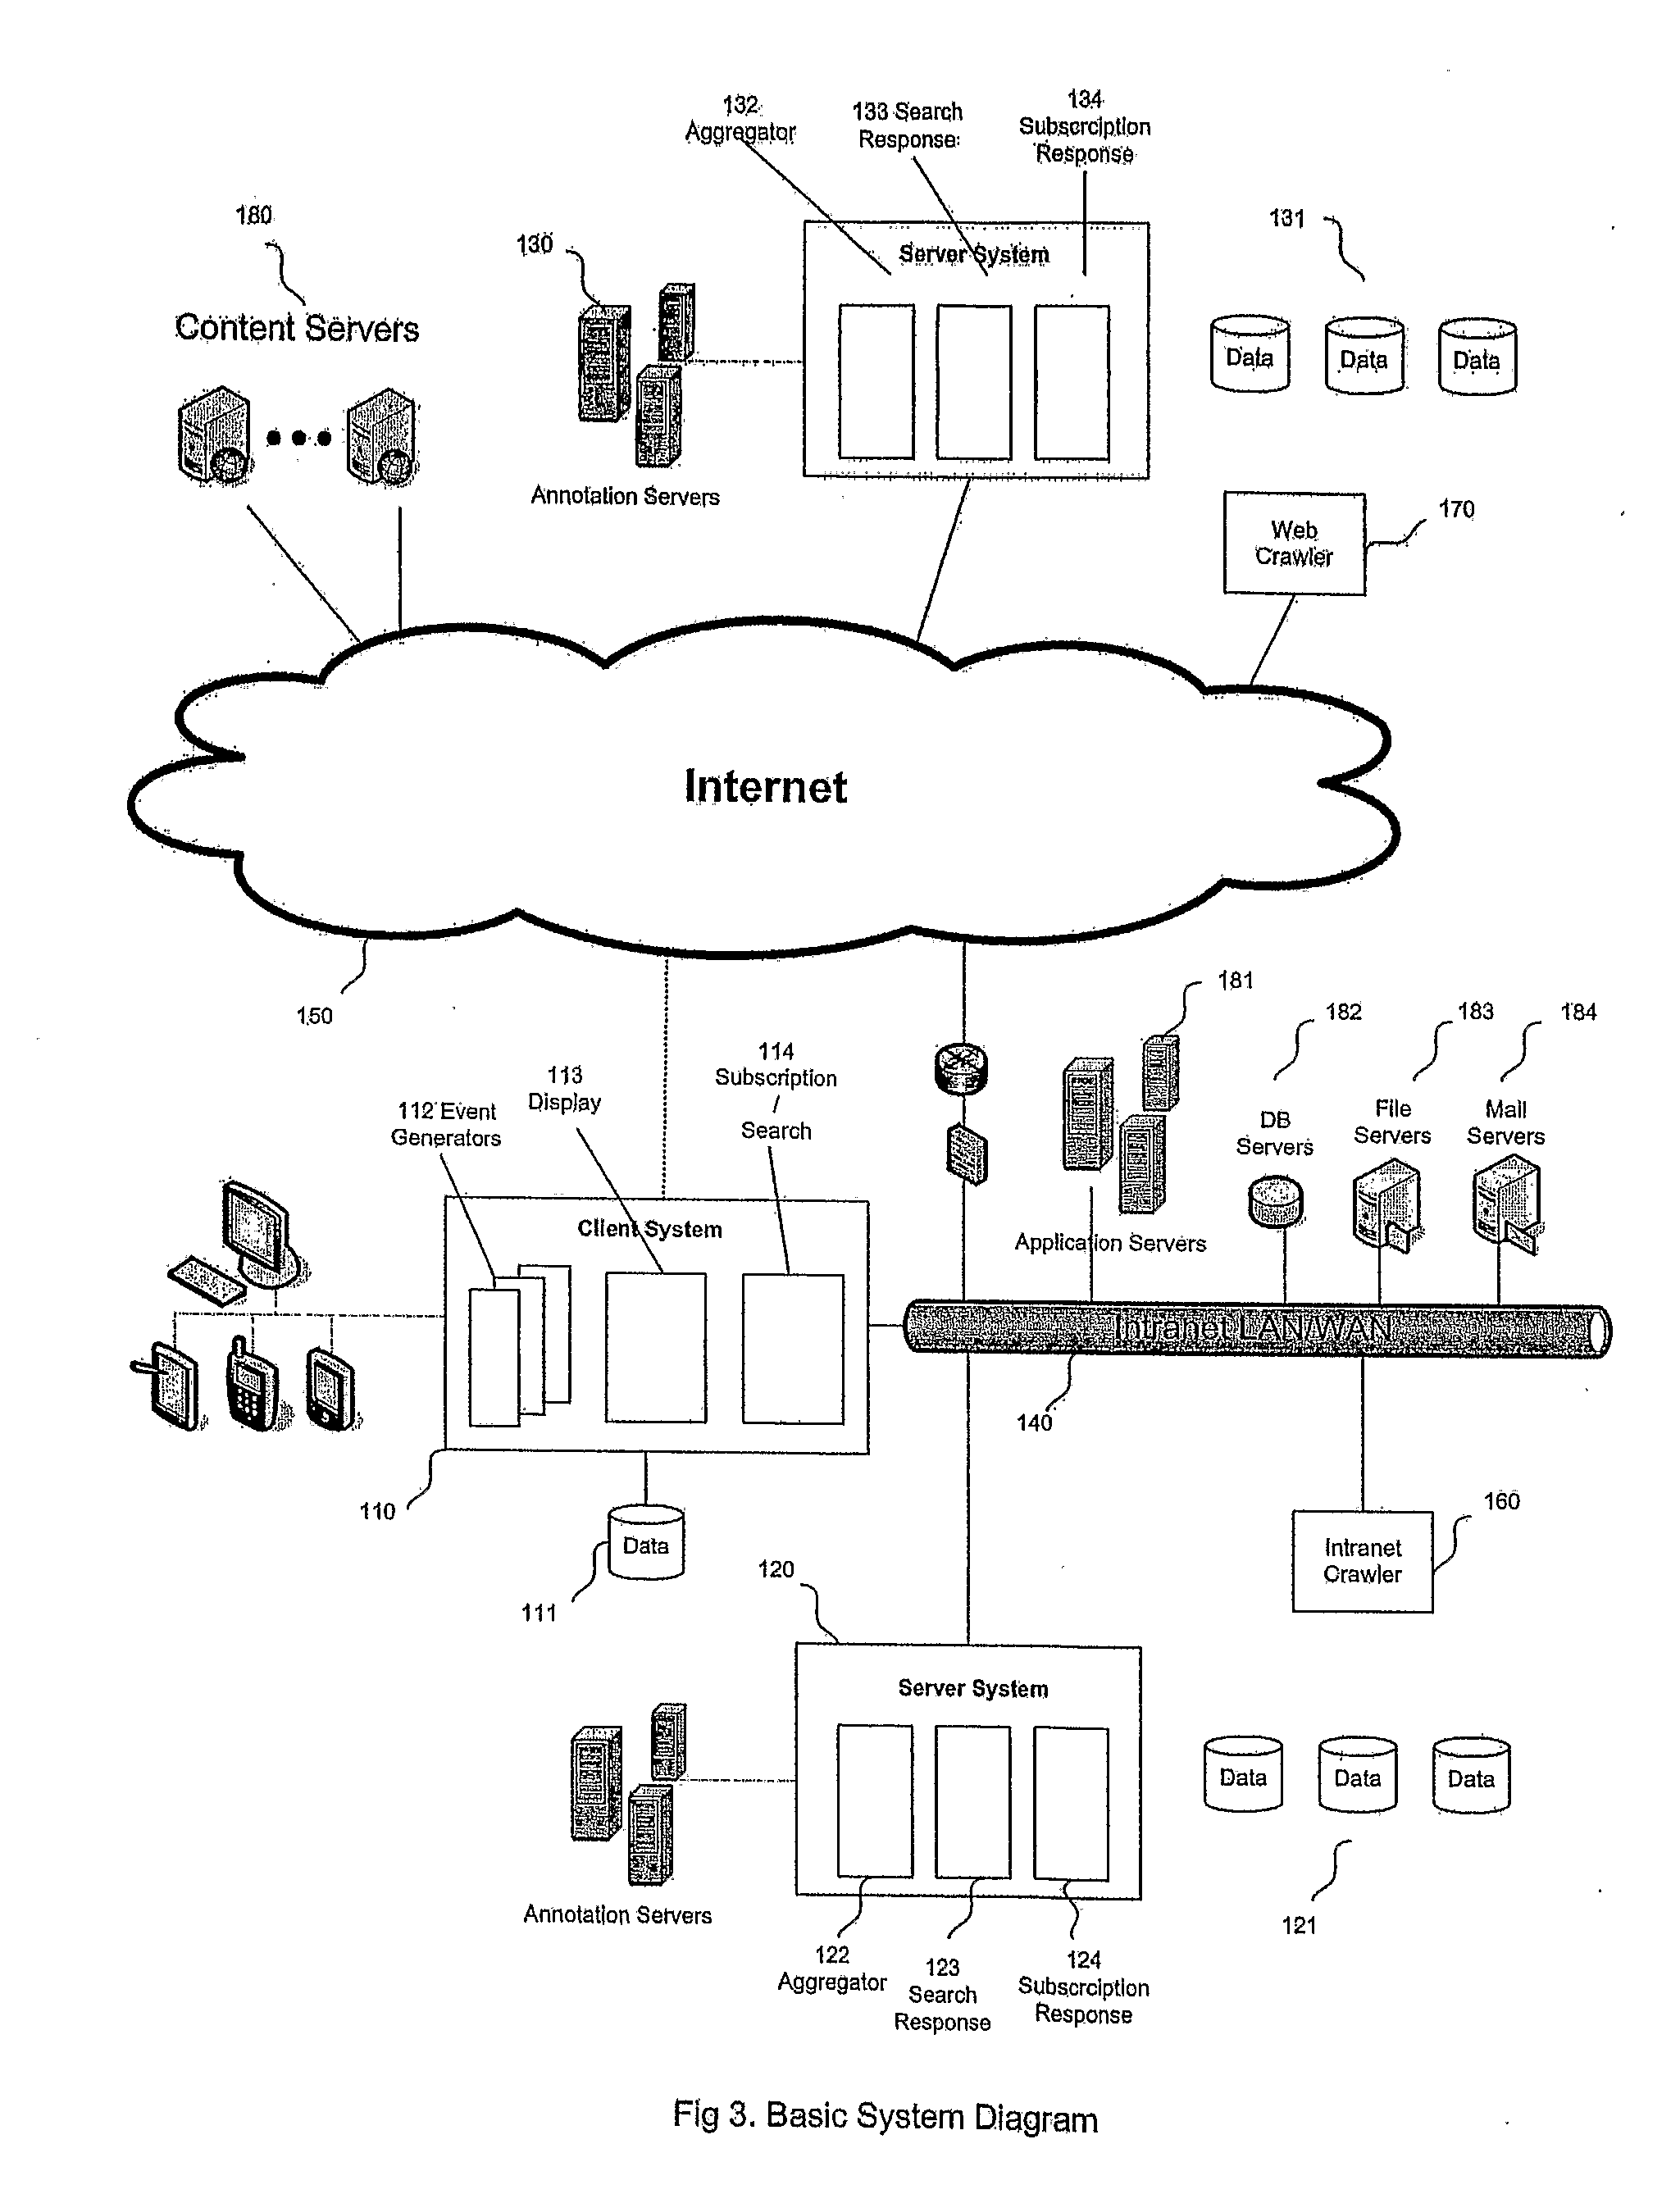 System for Communication and Collaboration